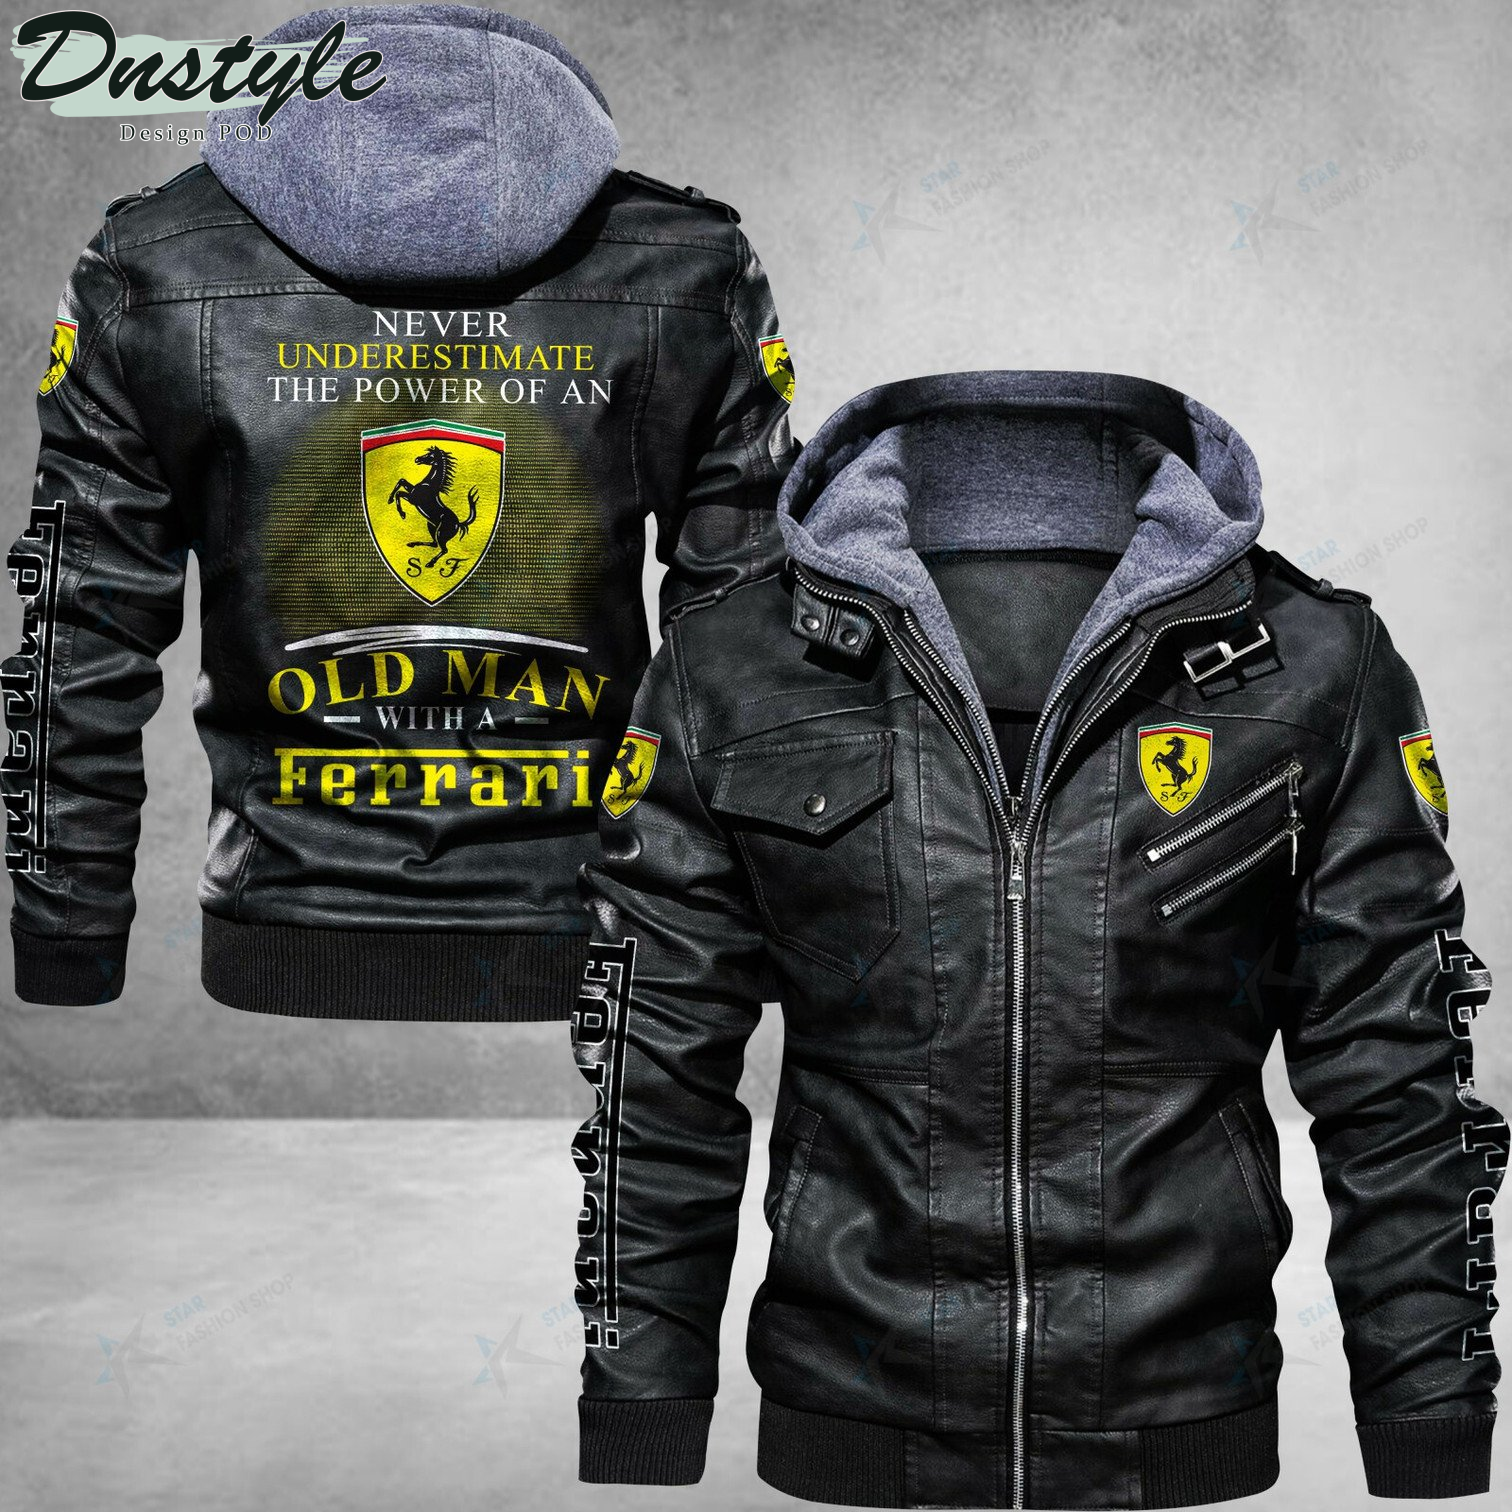 Ferrari never underestimate the power of an old man leather jacket